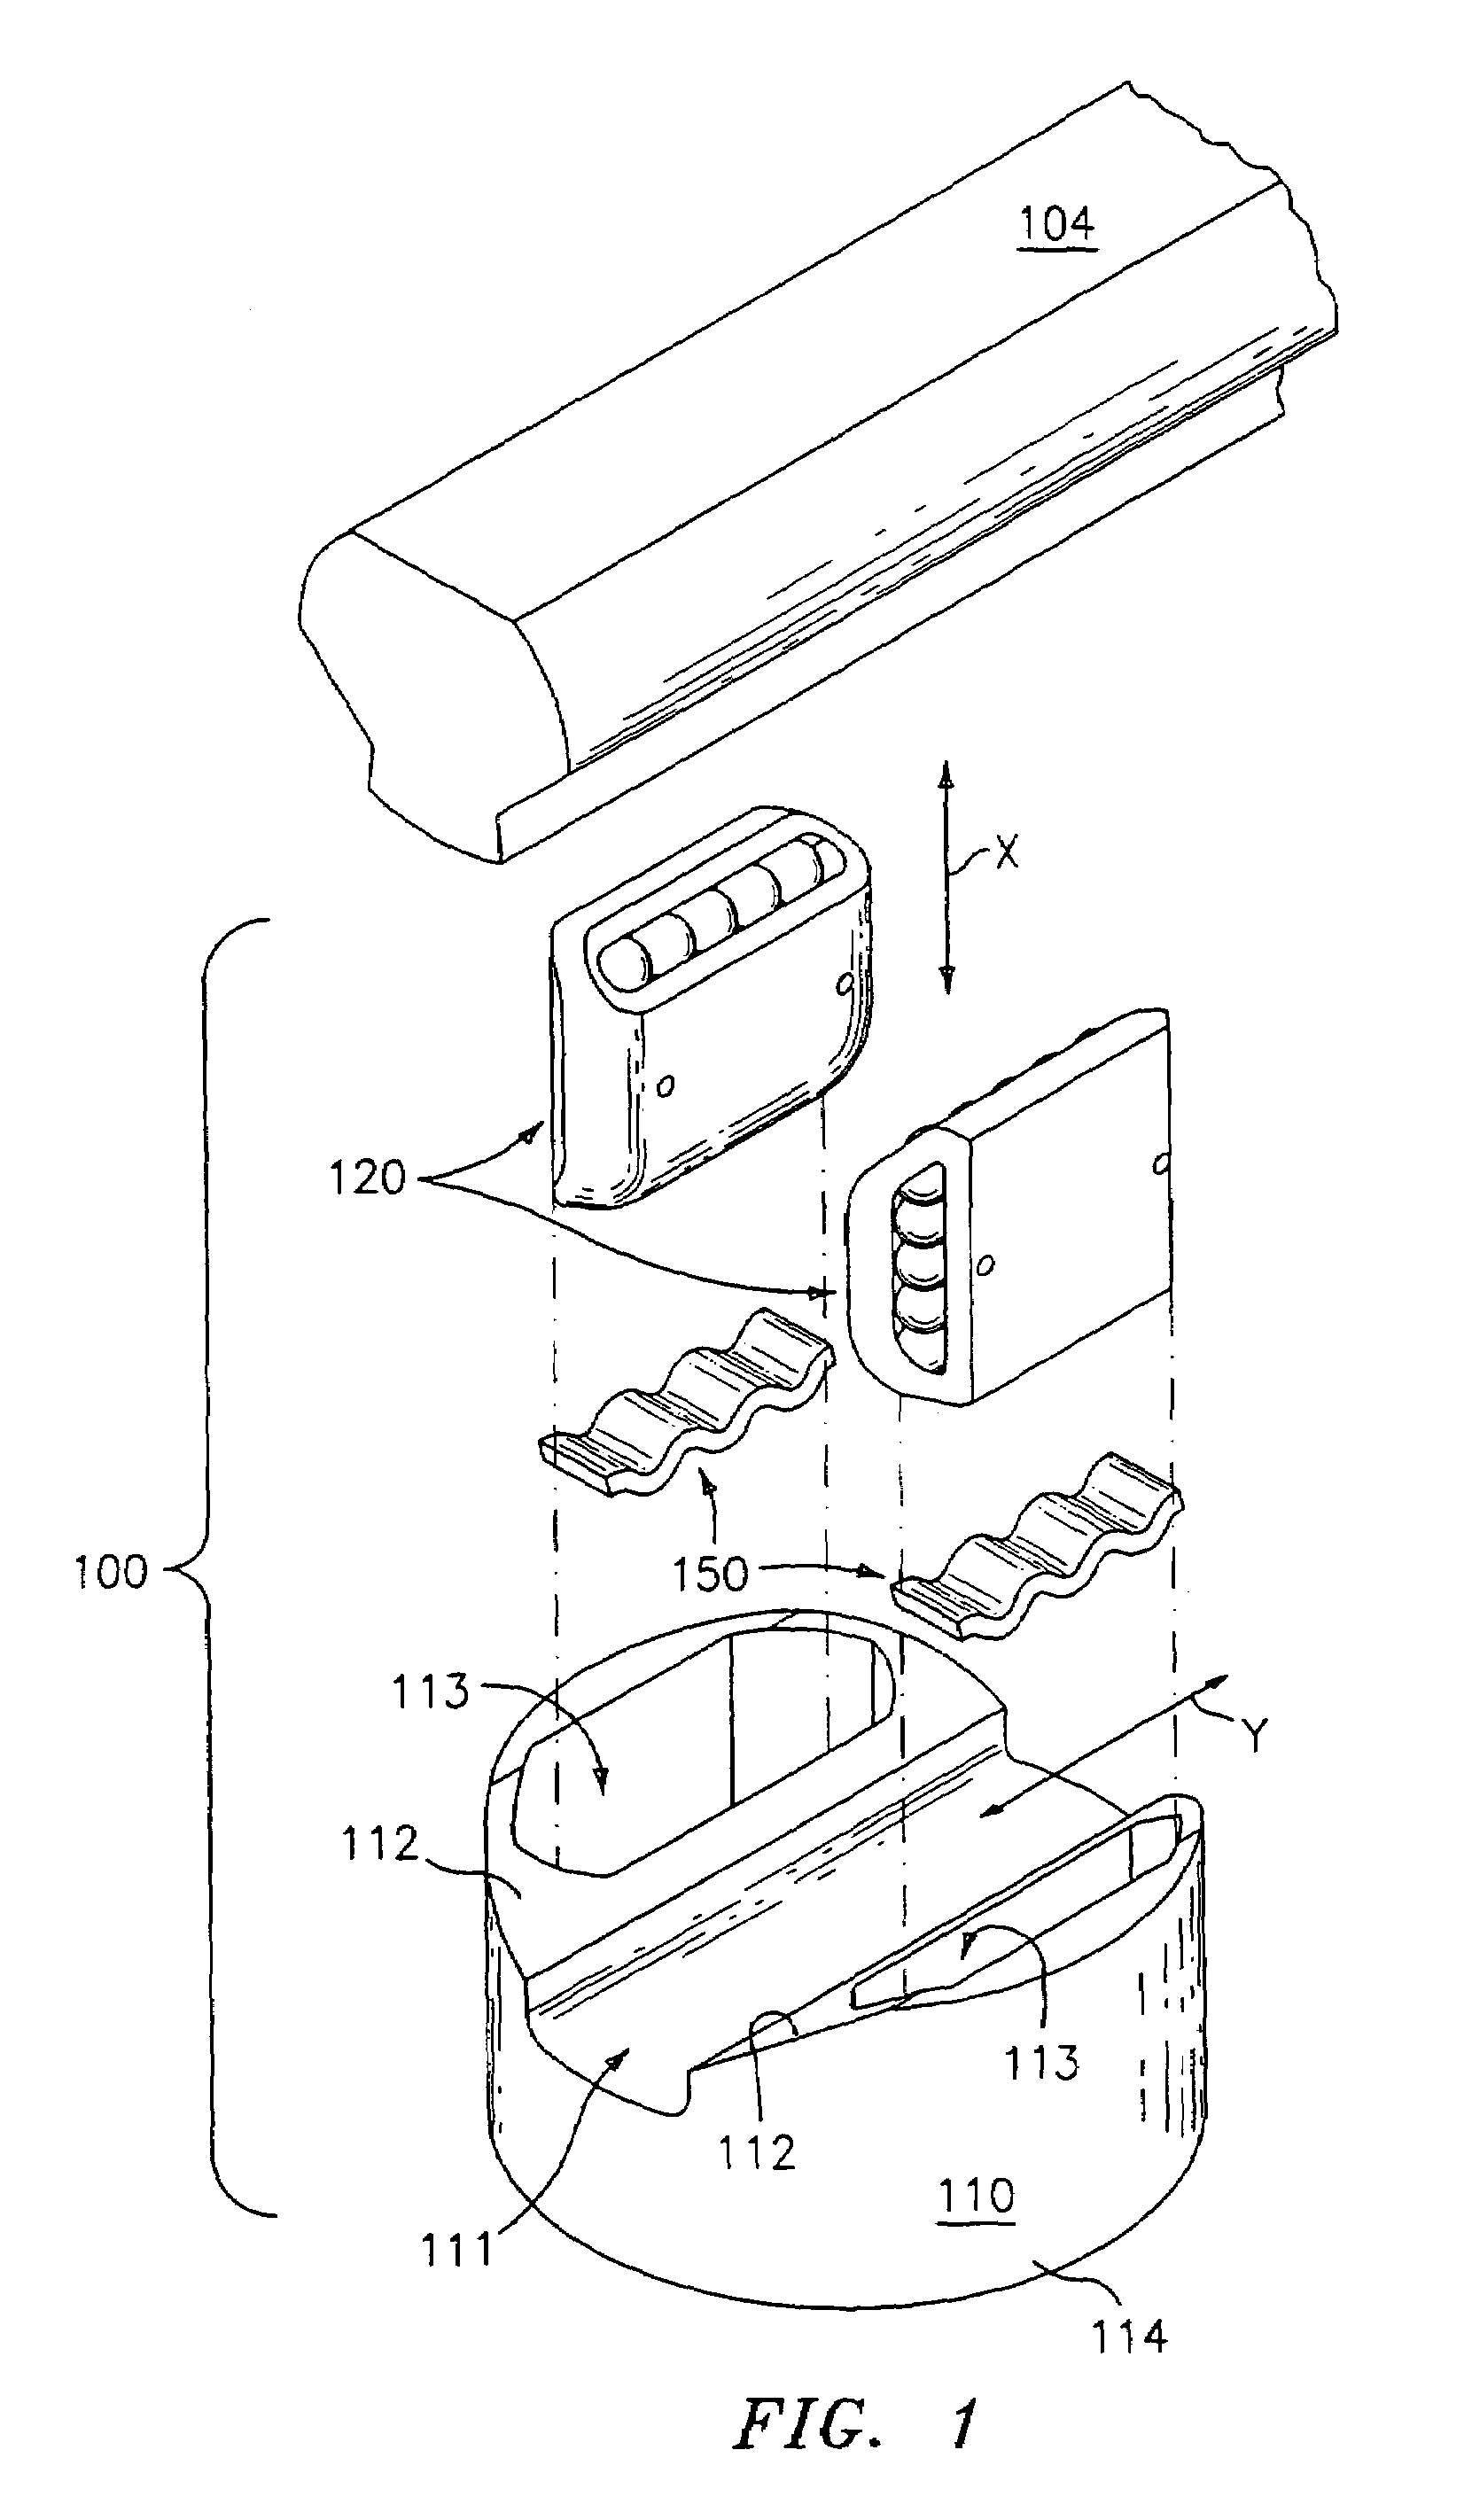 Recirculating rolling element cartridge for linear motion bearing assembly